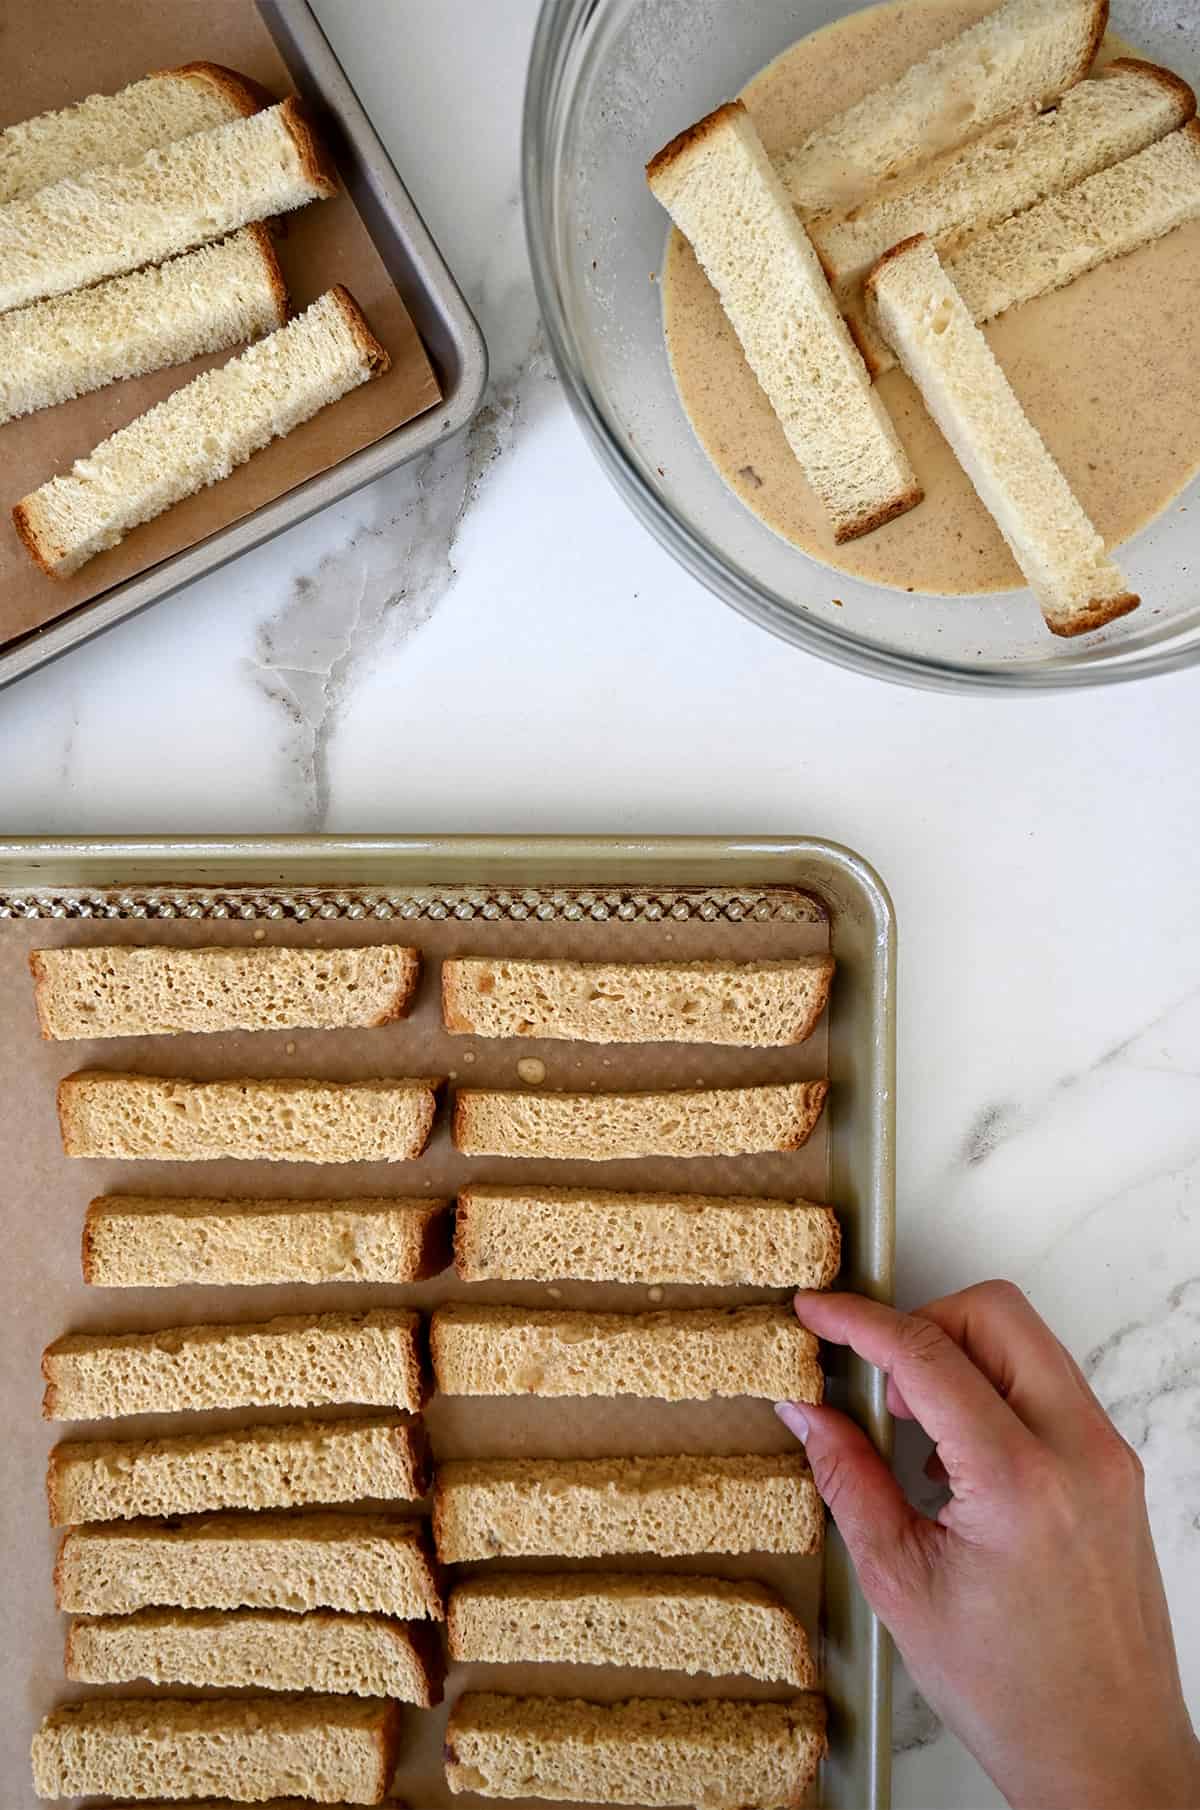 Bread sticks coated in a cinnamon-vanilla custard on a parchment-paper lined baking sheet.